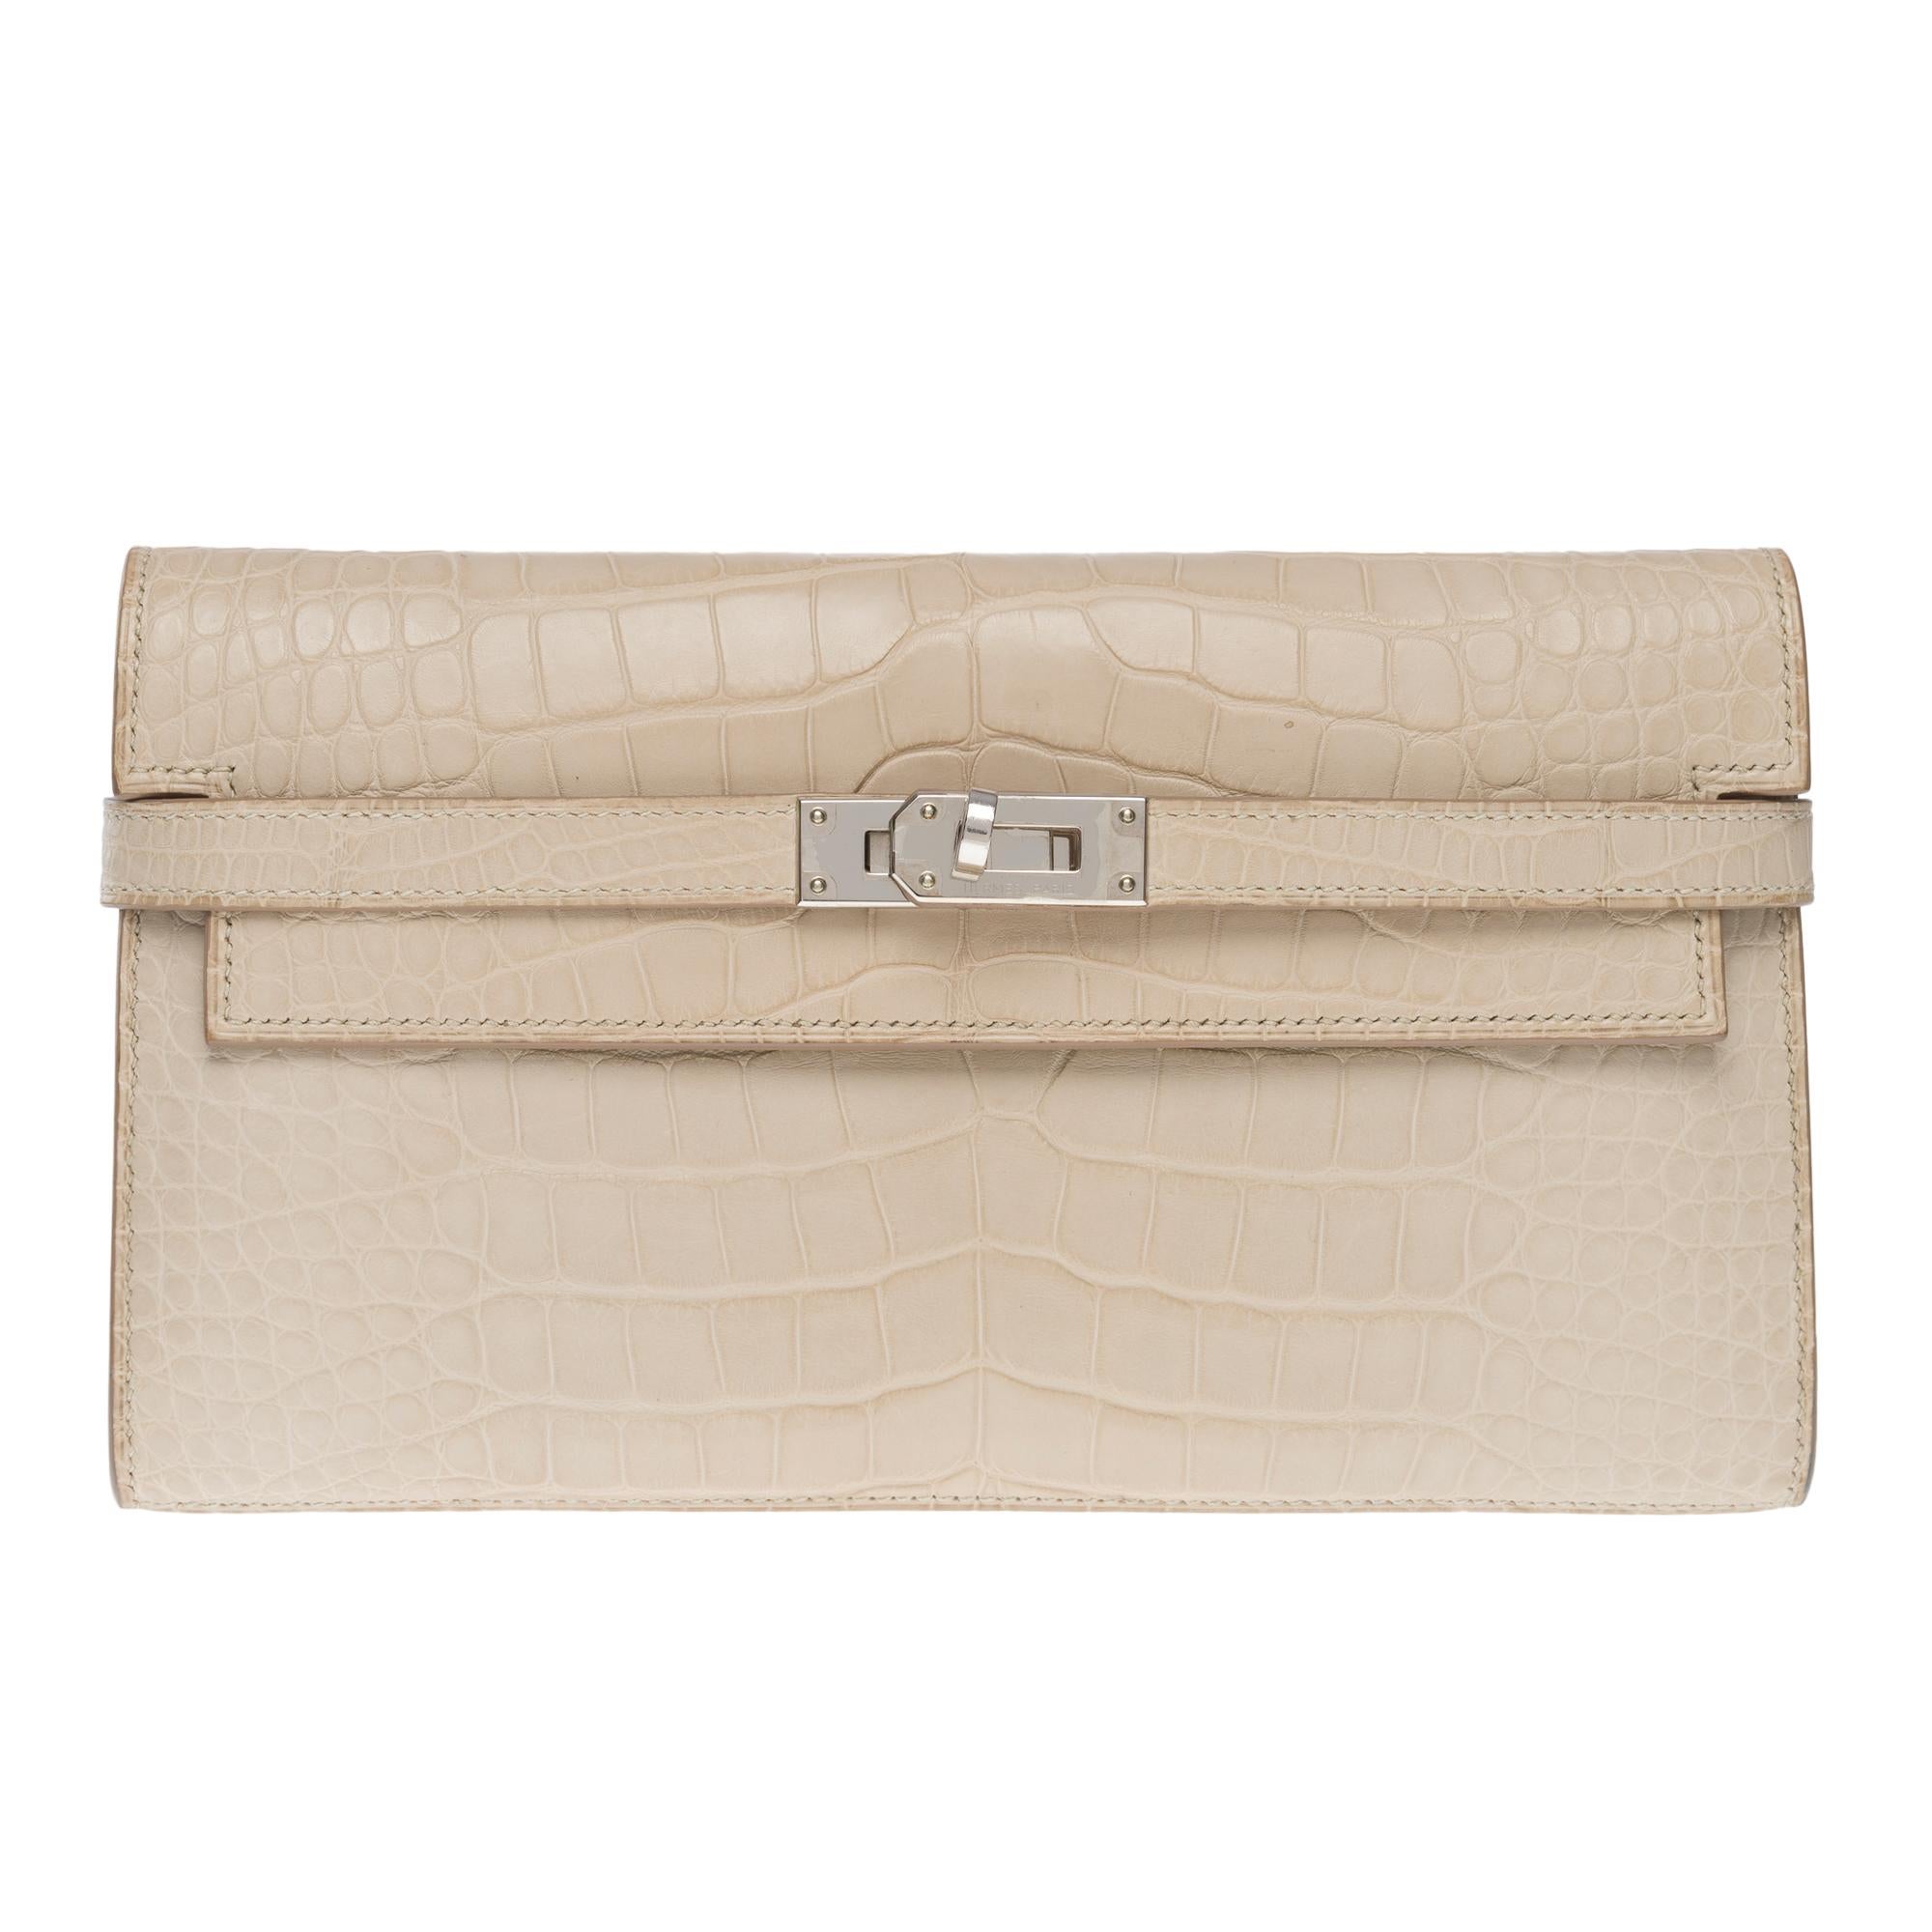 Beautiful & Rare Hermès Kelly Wallet in Beton (concrete) Alligator , palladium silver metal hardware, for a hand carry

Flap closure
Beige leather inner lining, 3 compartments including a zip, two patch pockets, 12 card slots
Signature: 